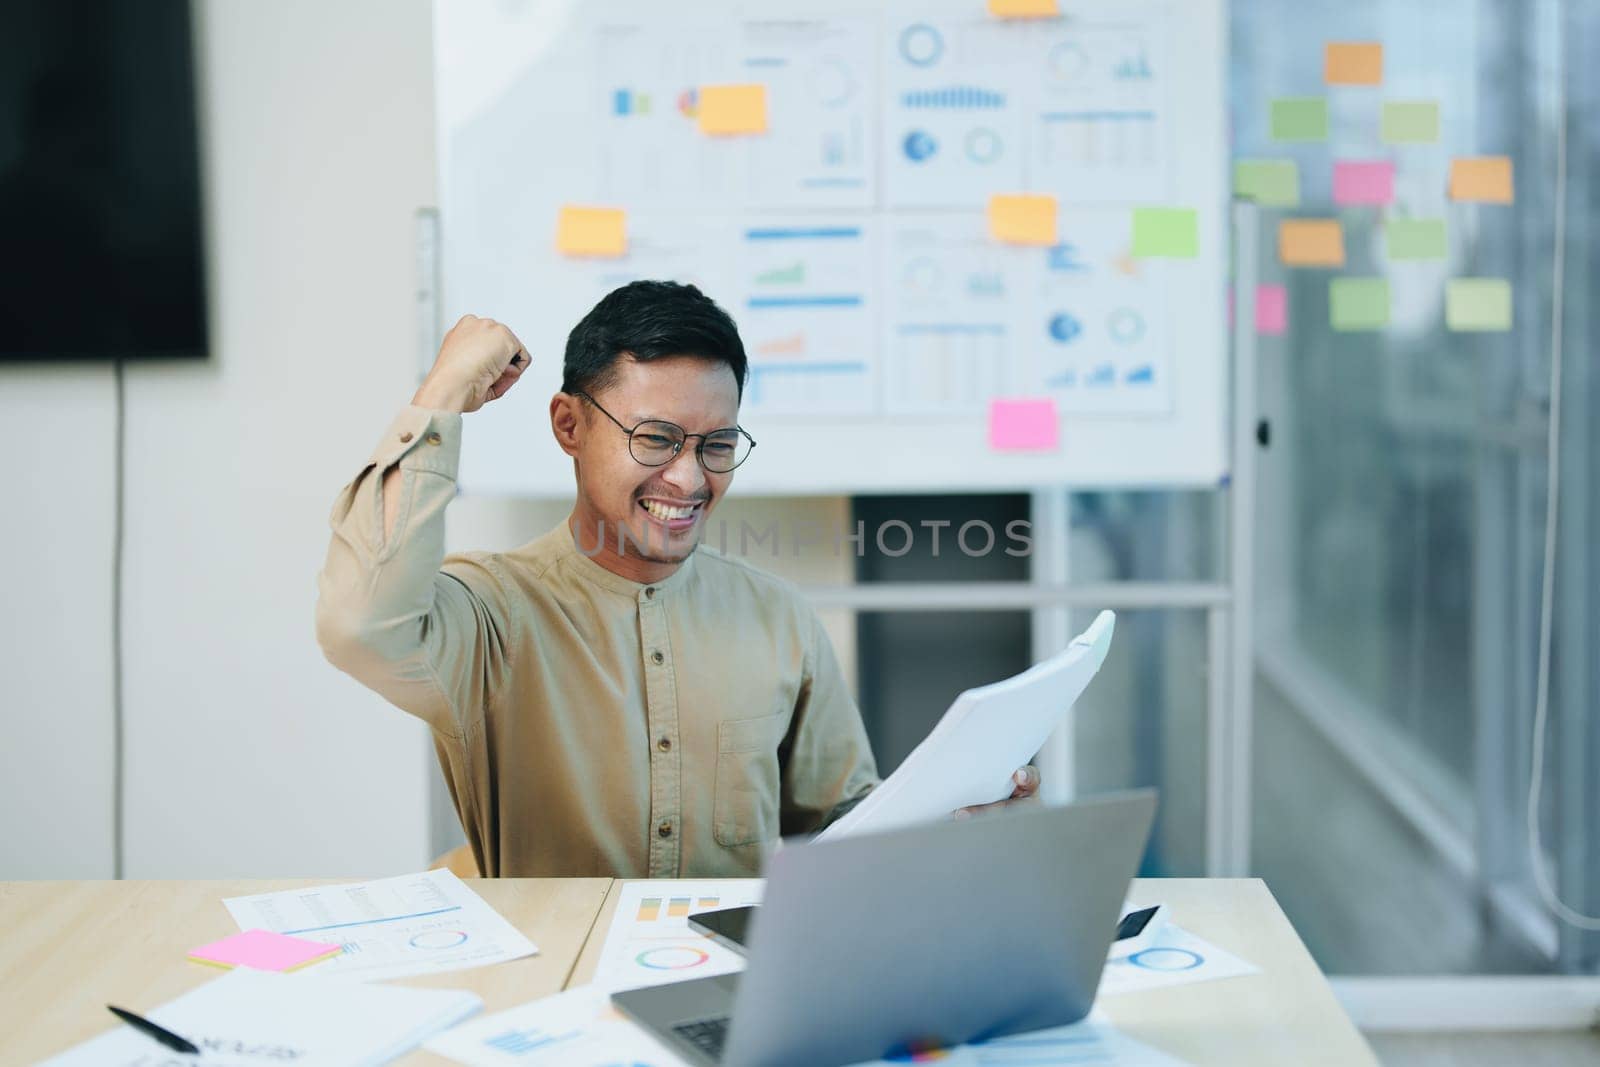 Portrait of a male business owner showing a happy smiling face as he has successfully invested his business using computers and financial budget documents at work.